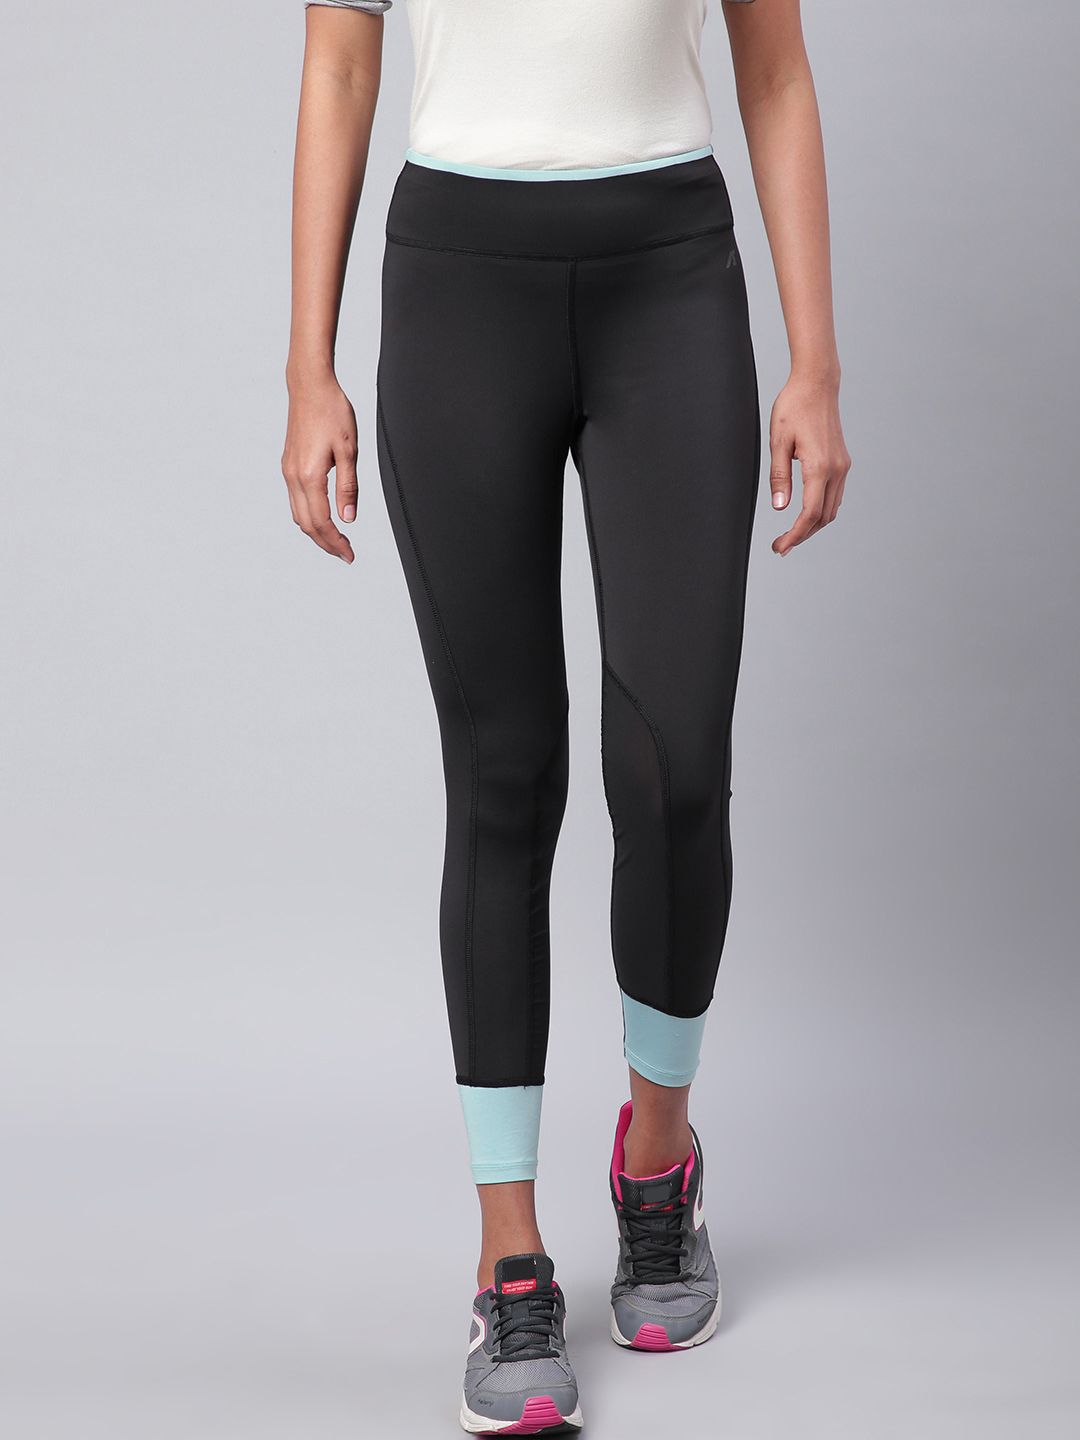 Alcis Women Black Solid Training Tights Price in India